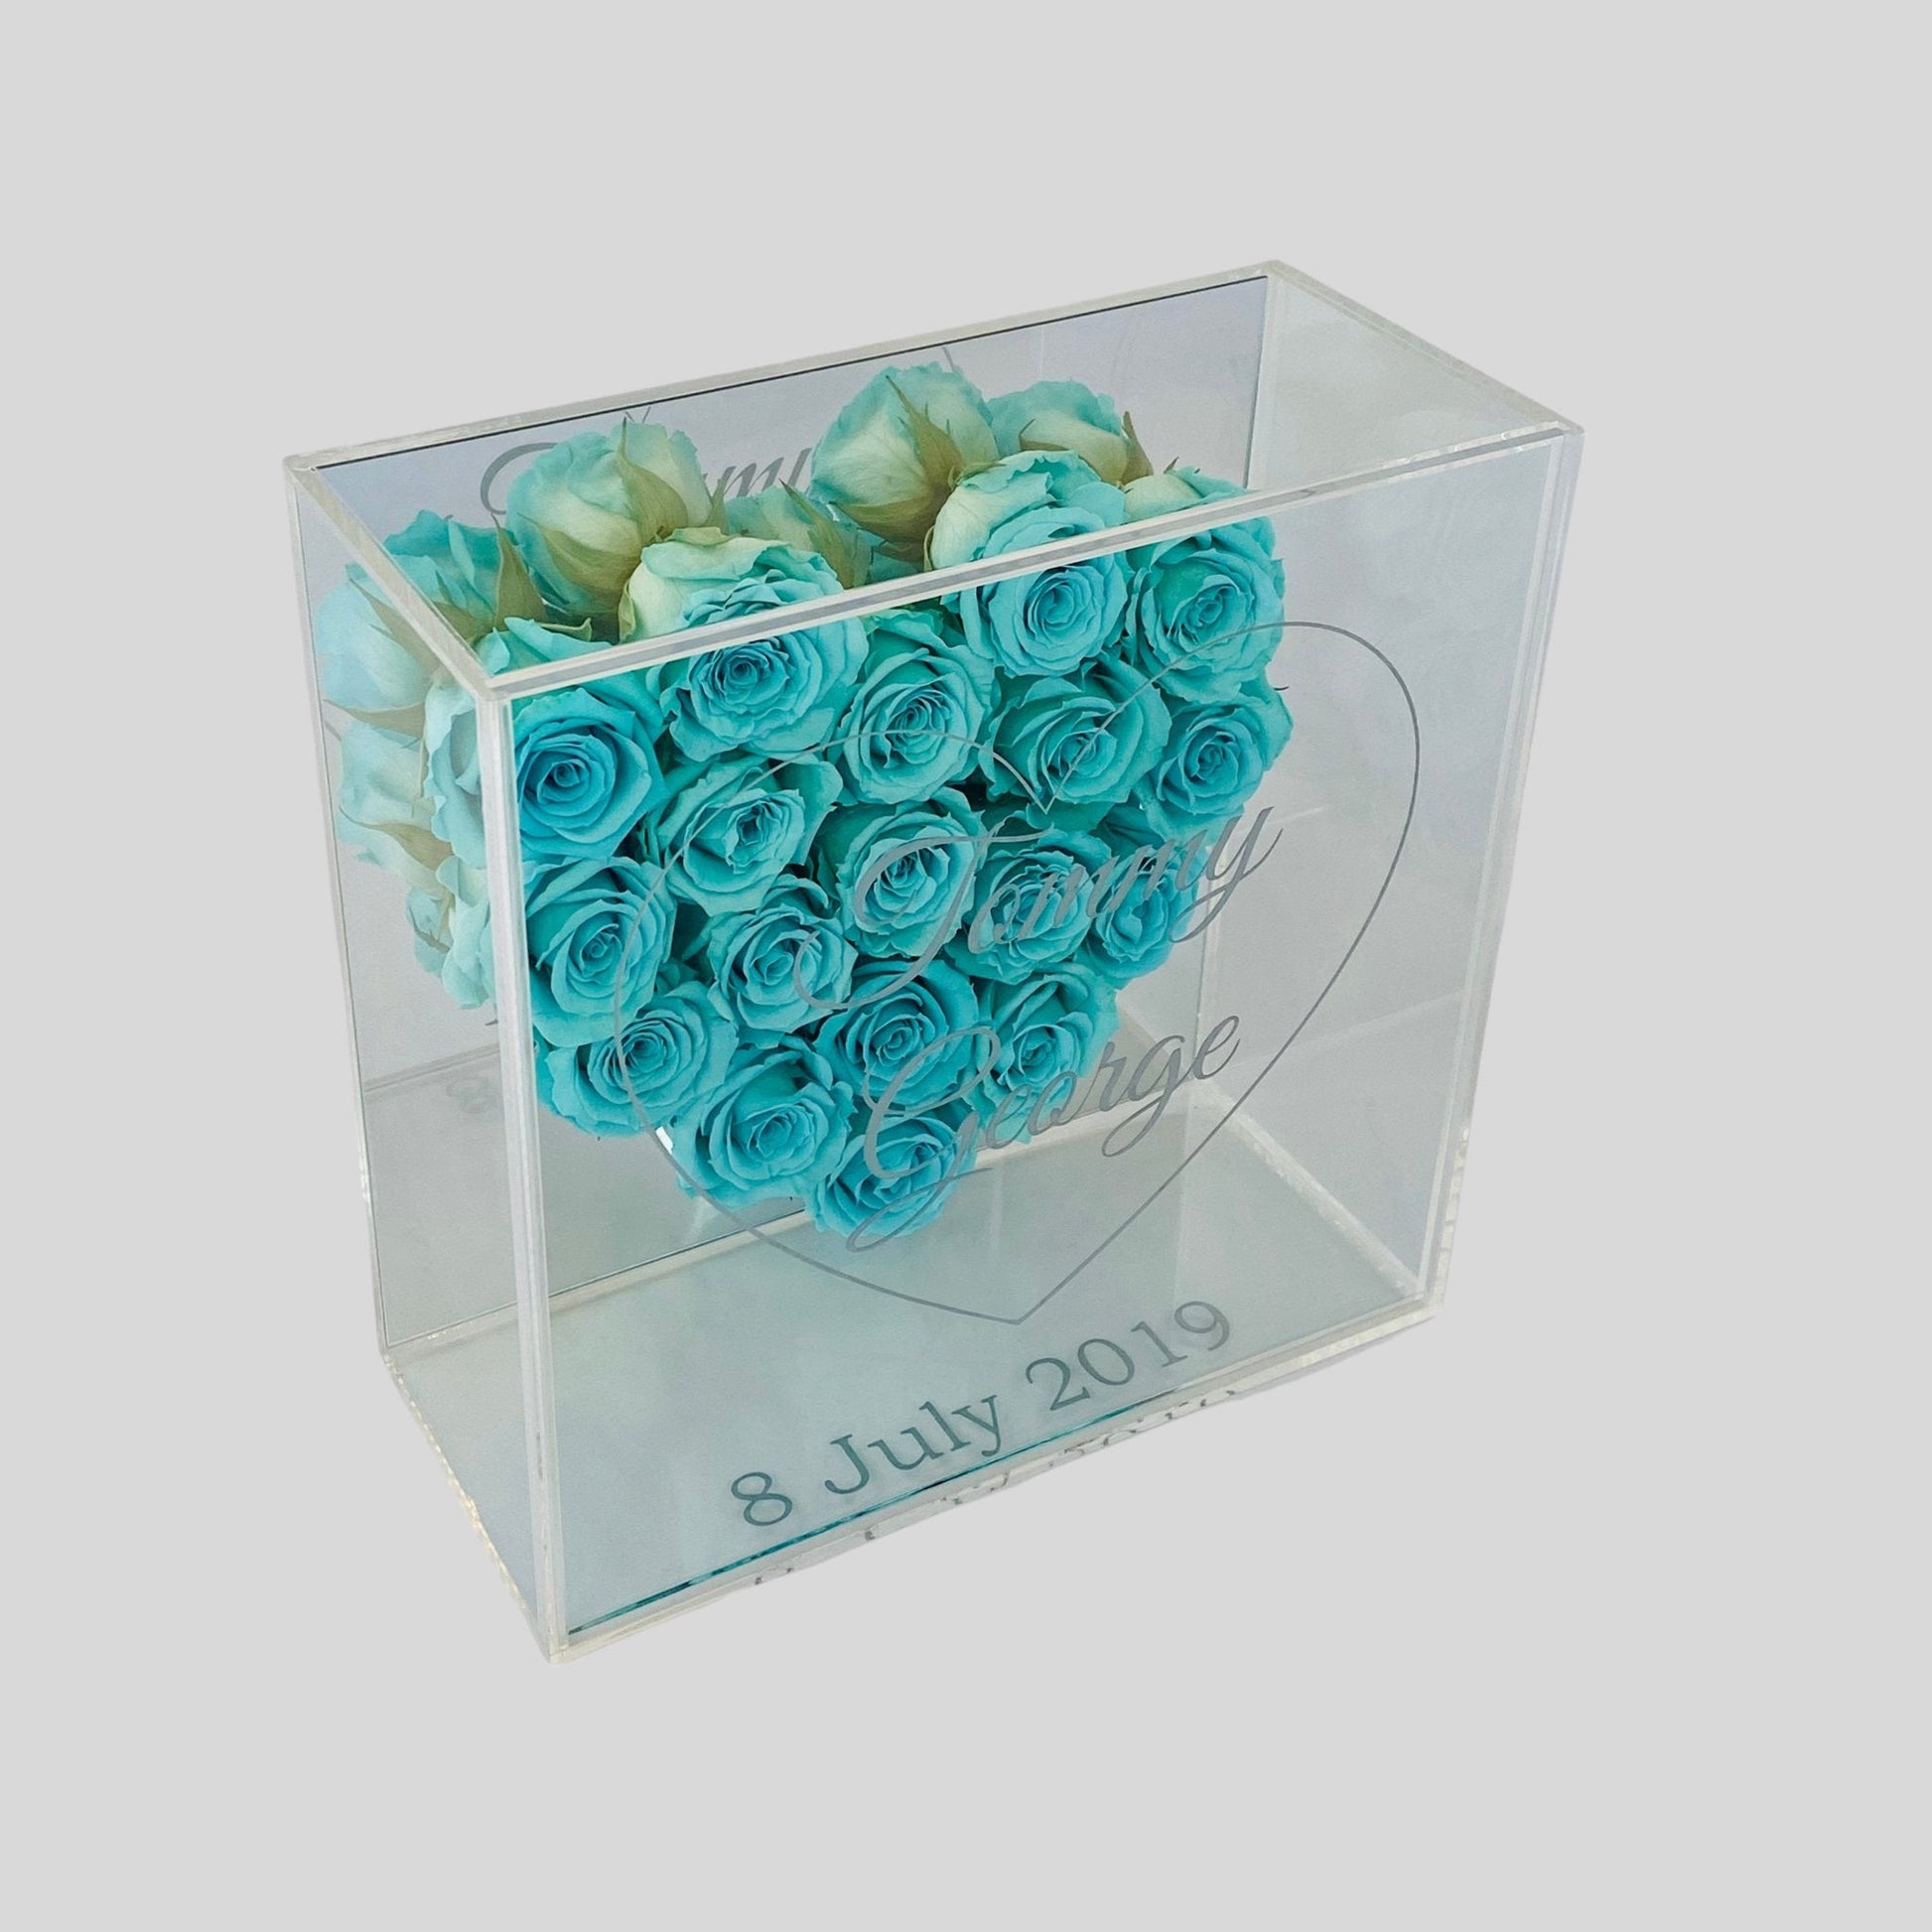 Full Heart addition to Love Blooms - Tiffany Infinity Roses - One Year Roses - Heart Shaped Box